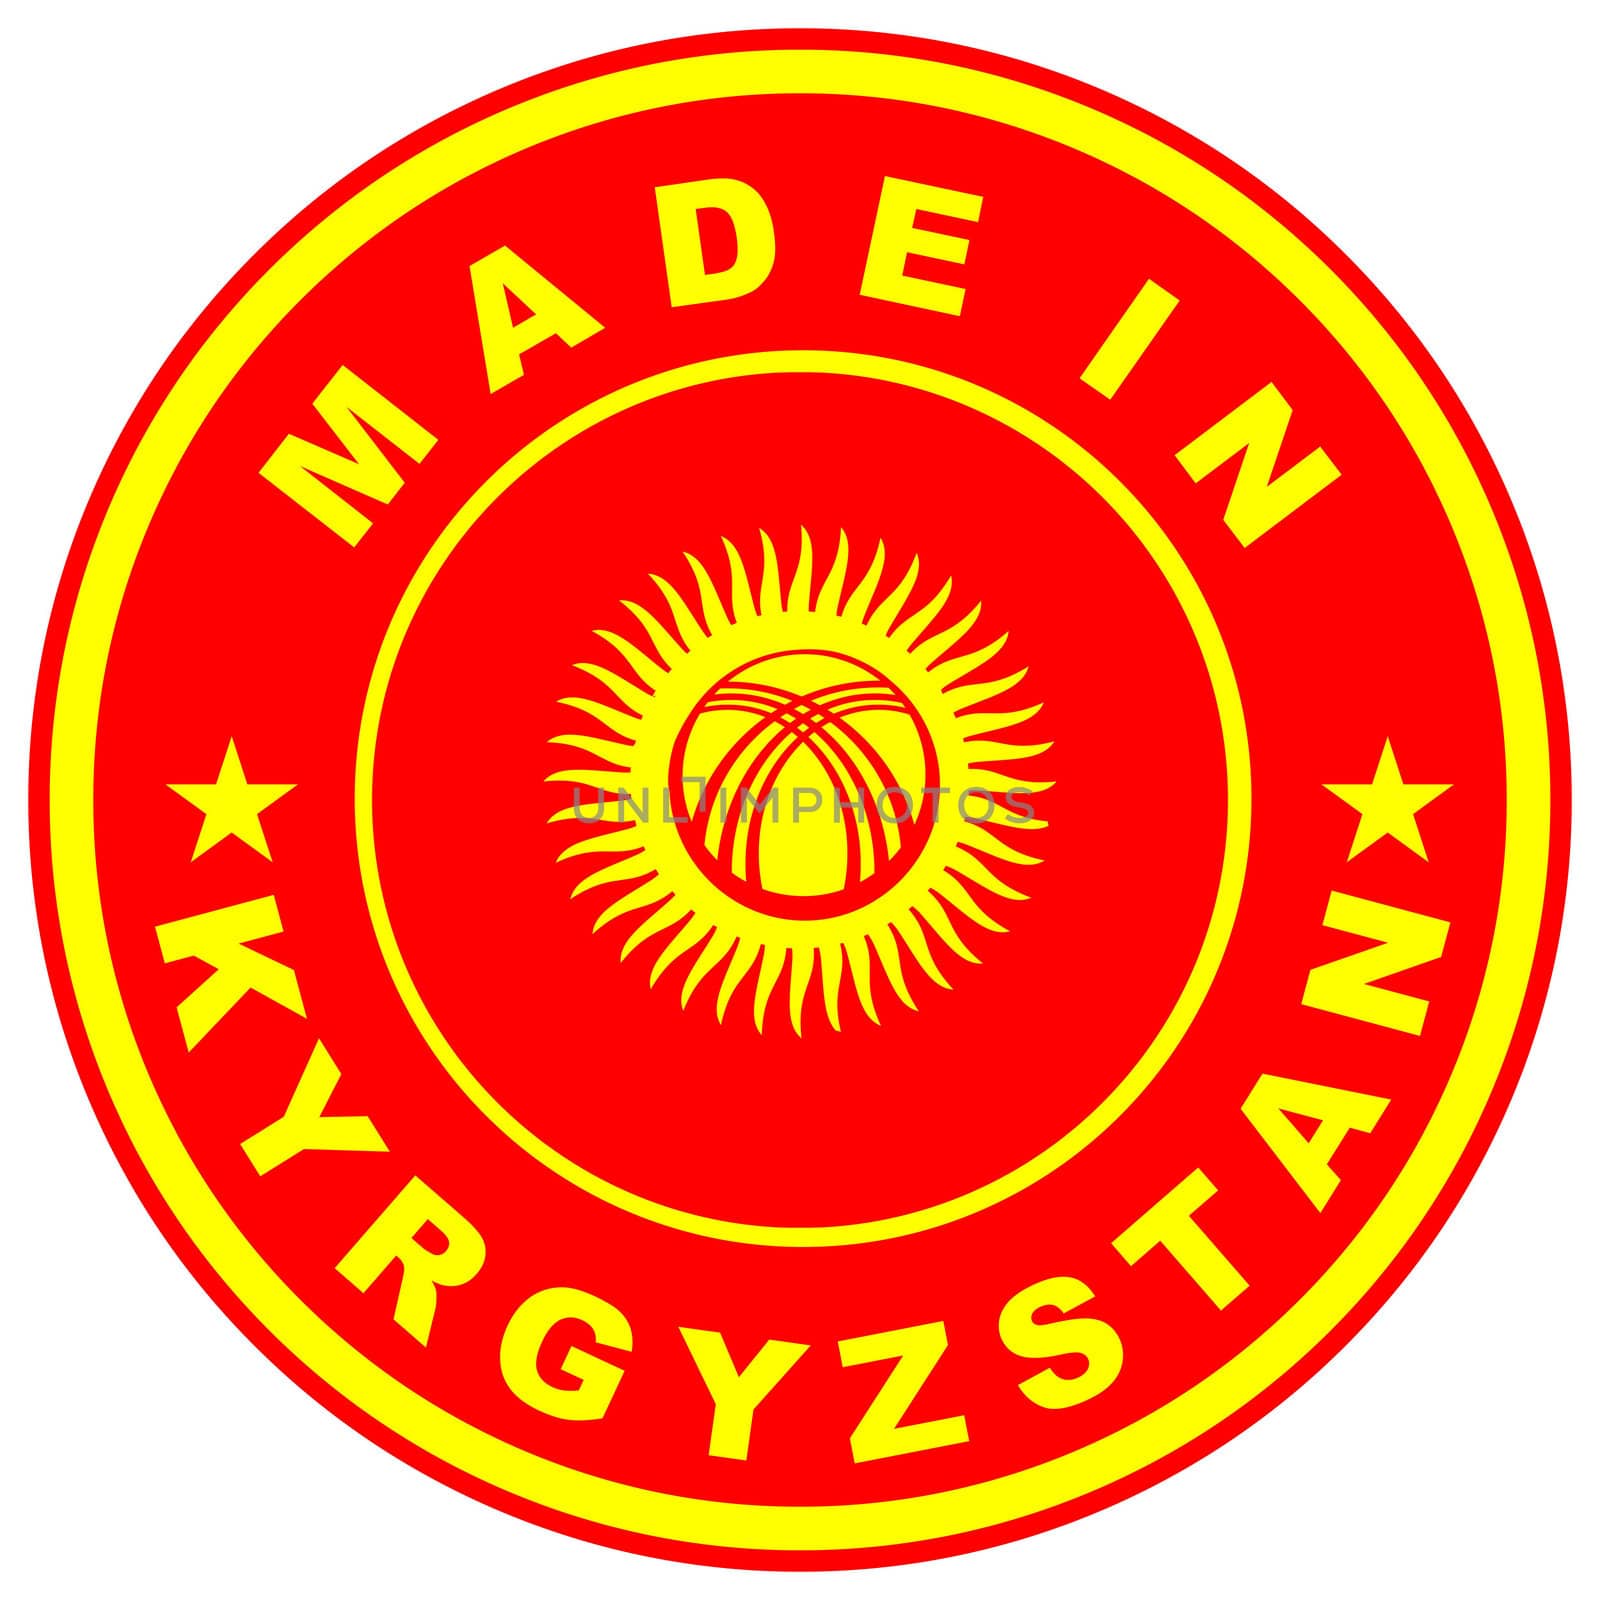 made in kyrgyzstan by tony4urban